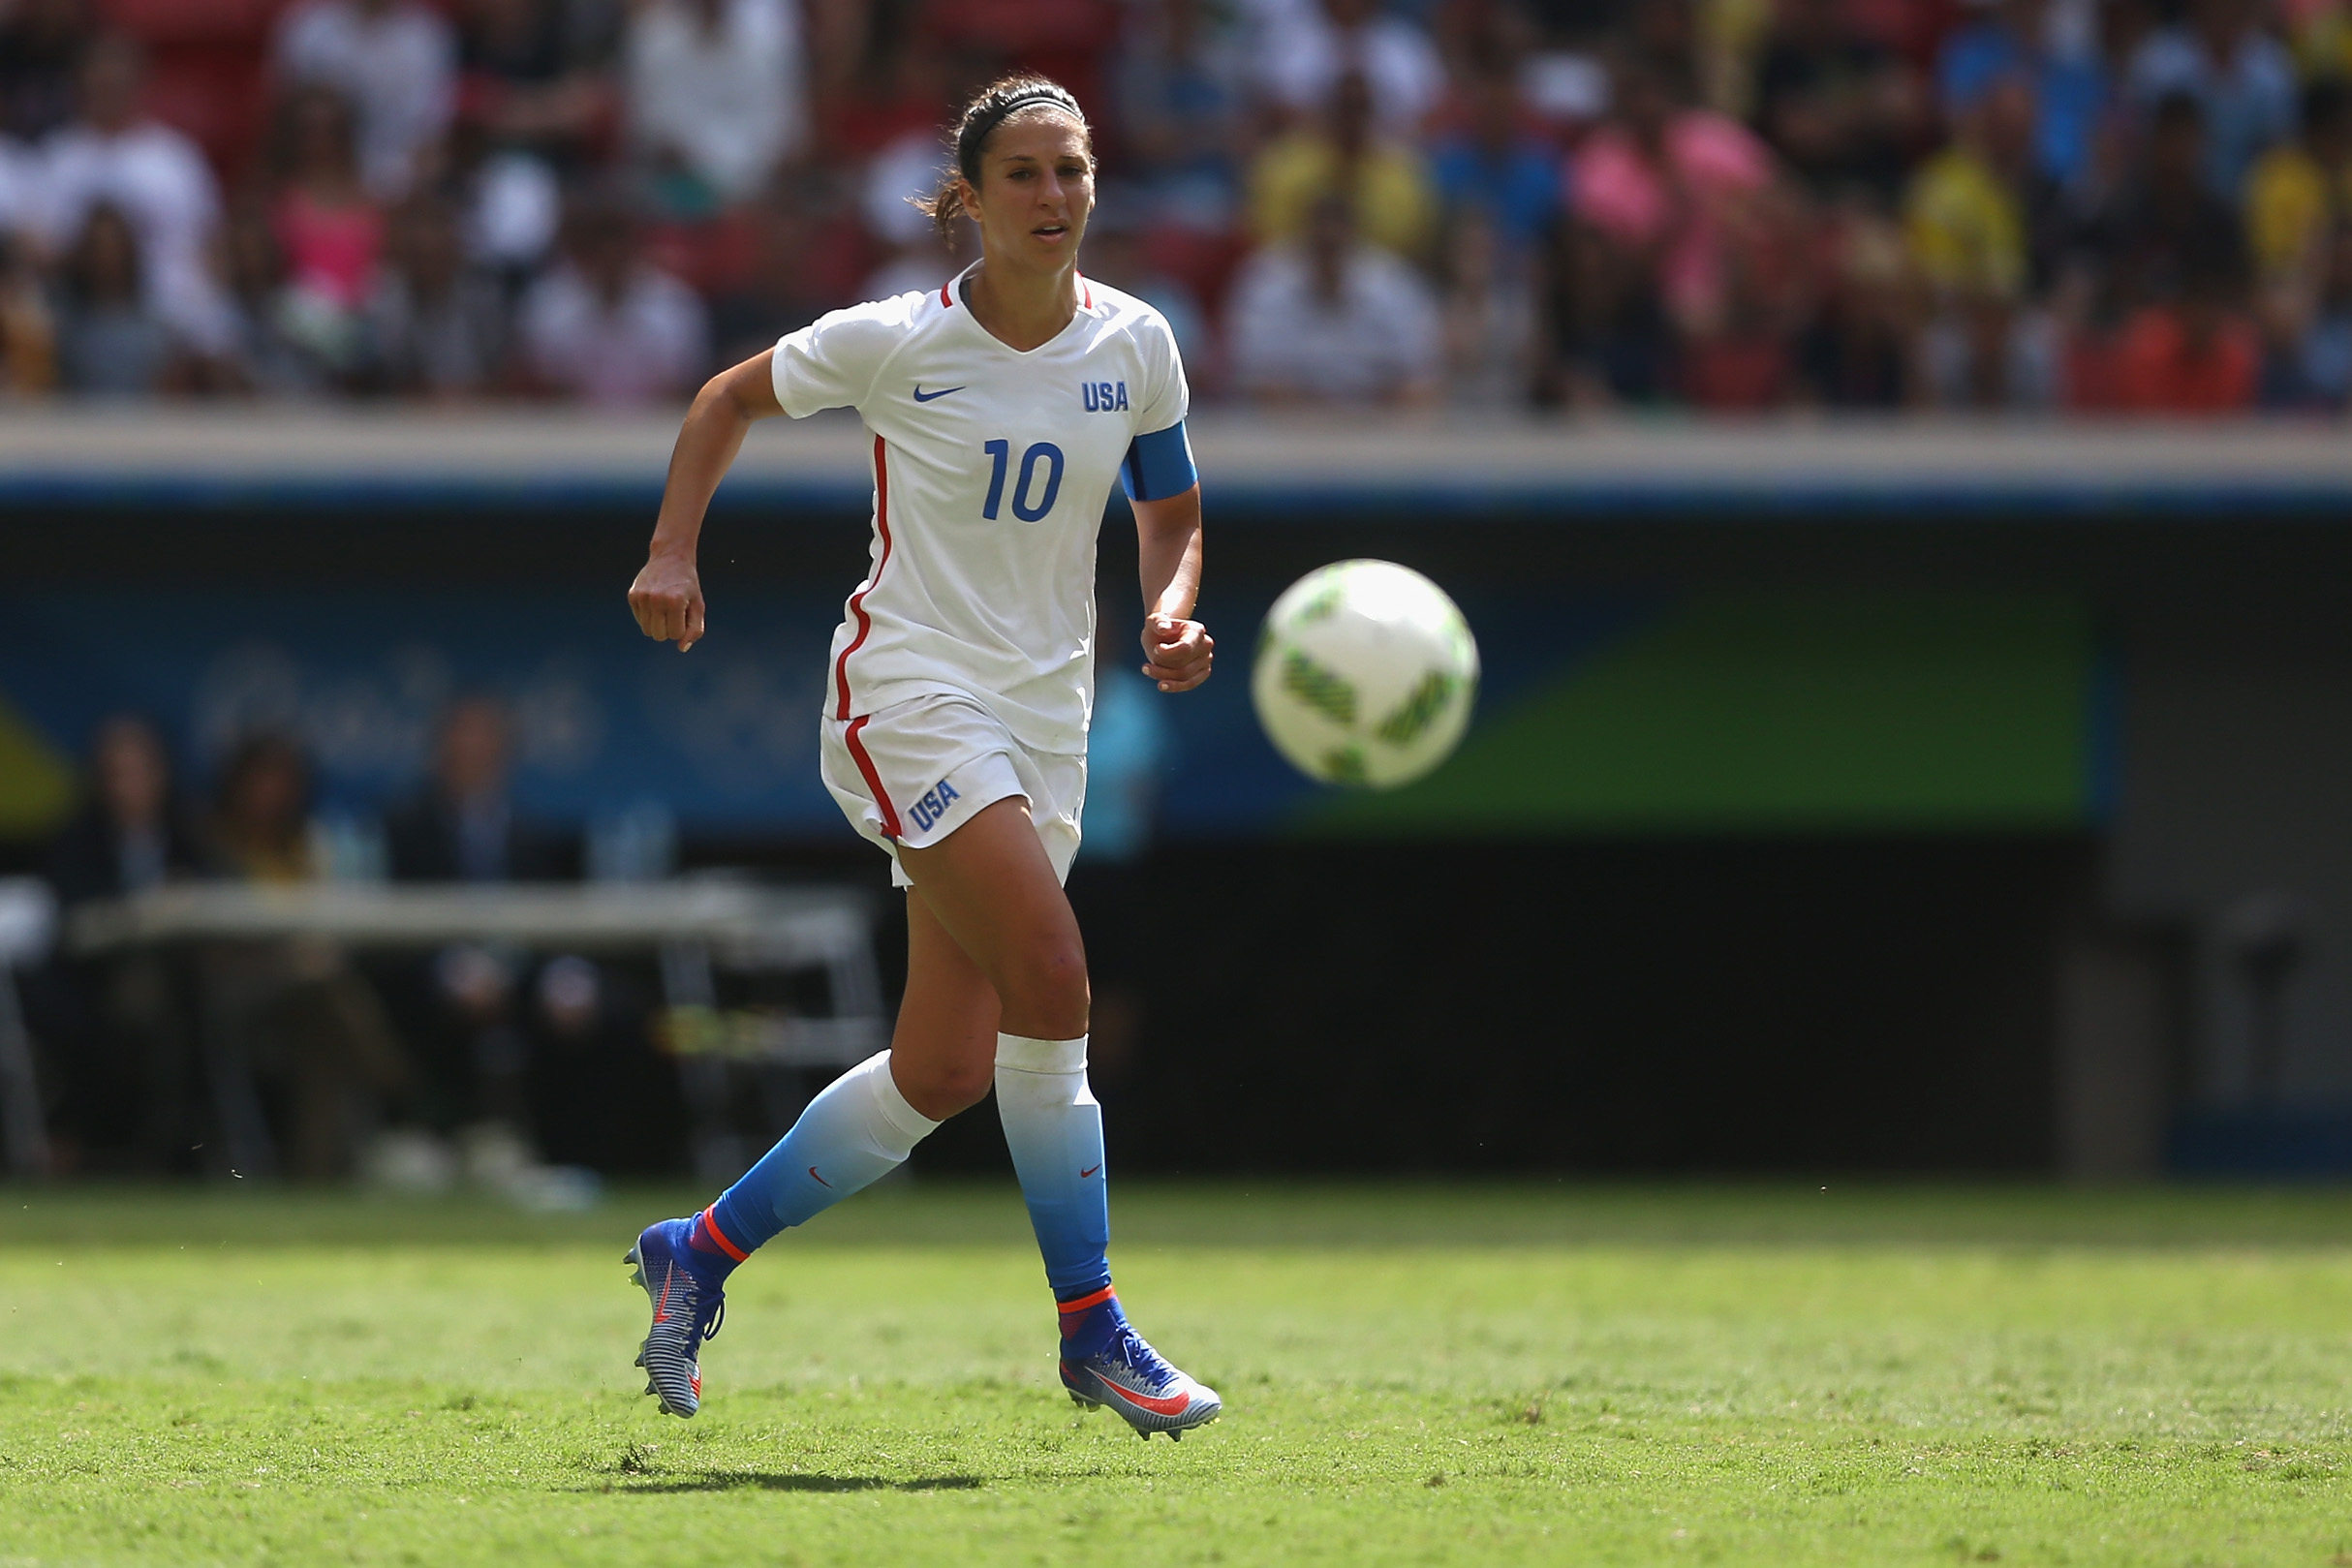 PHOTO: Carli Lloyd of the U.S. moves the ball against Sweden in the first half during the Women's Football Quarterfinal match at Mane Garrincha Stadium on Day 7 of the Rio 2016 Olympic Games, August 12, 2016 in Brasilia, Brazil.